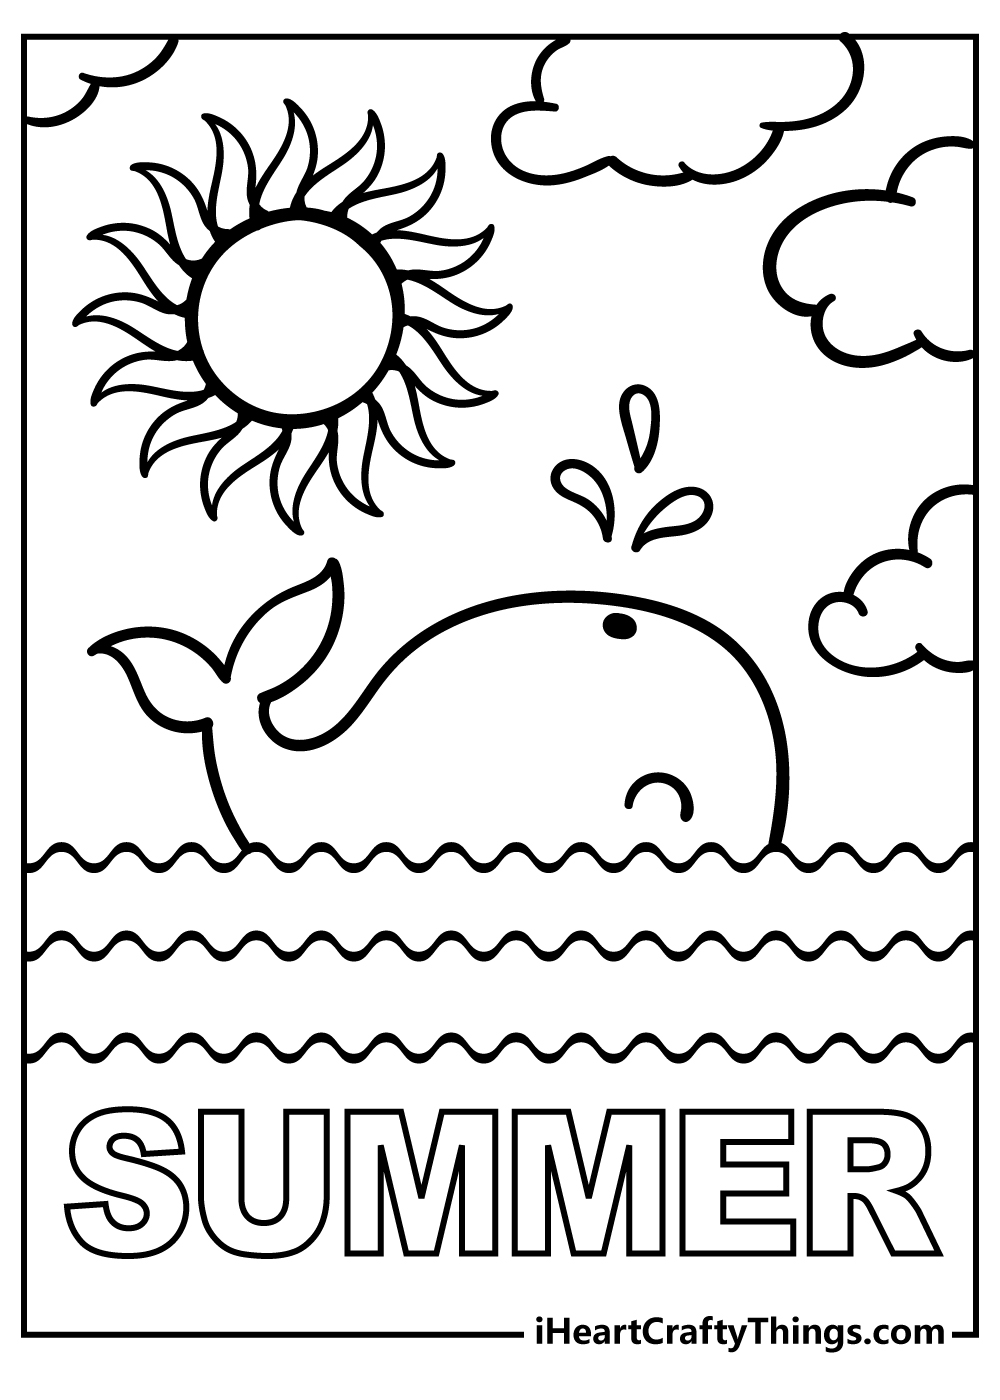 Summer Coloring Sheet for children free download